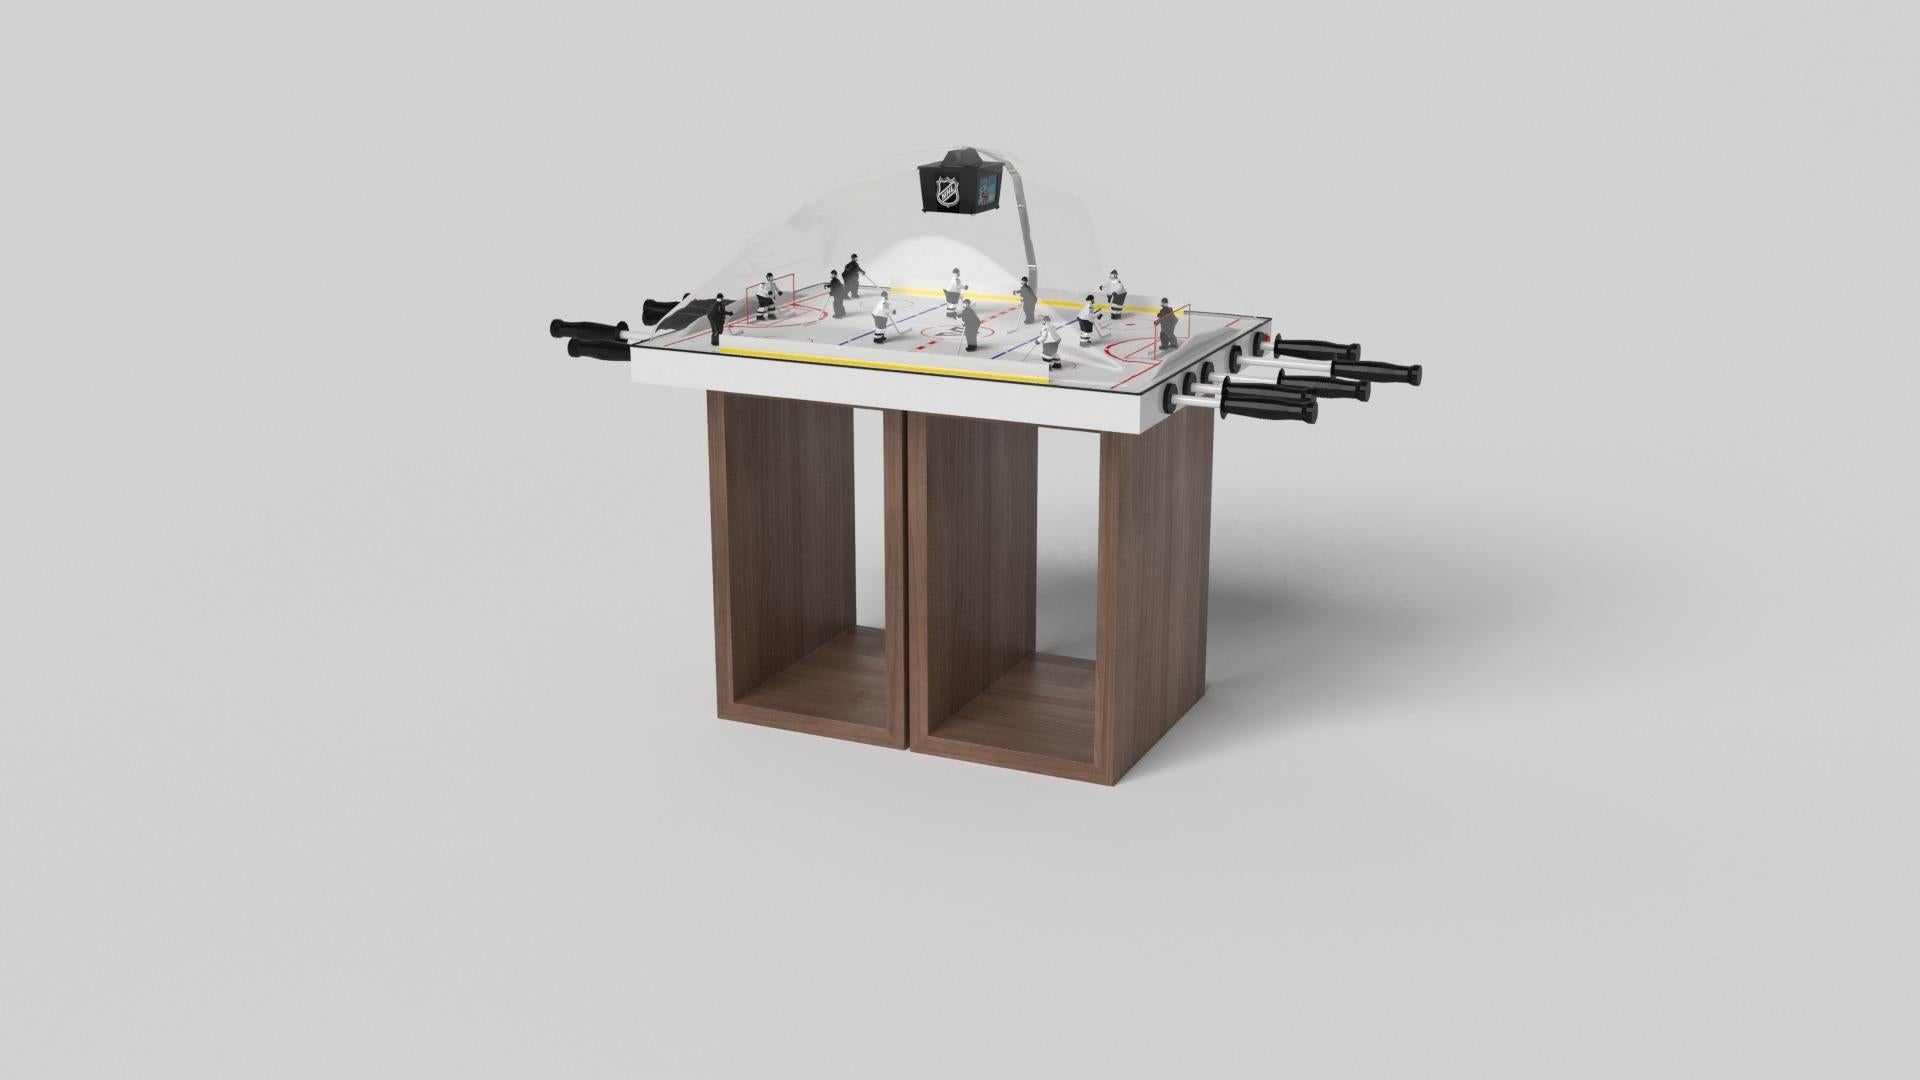 Supported by two rectangular open pedestals as the base, this handcrafted bubble hockey table is modern and minimalistic with its combination of simple, geometric forms. Viewed from the front, the use of negative space is evident; viewed from the